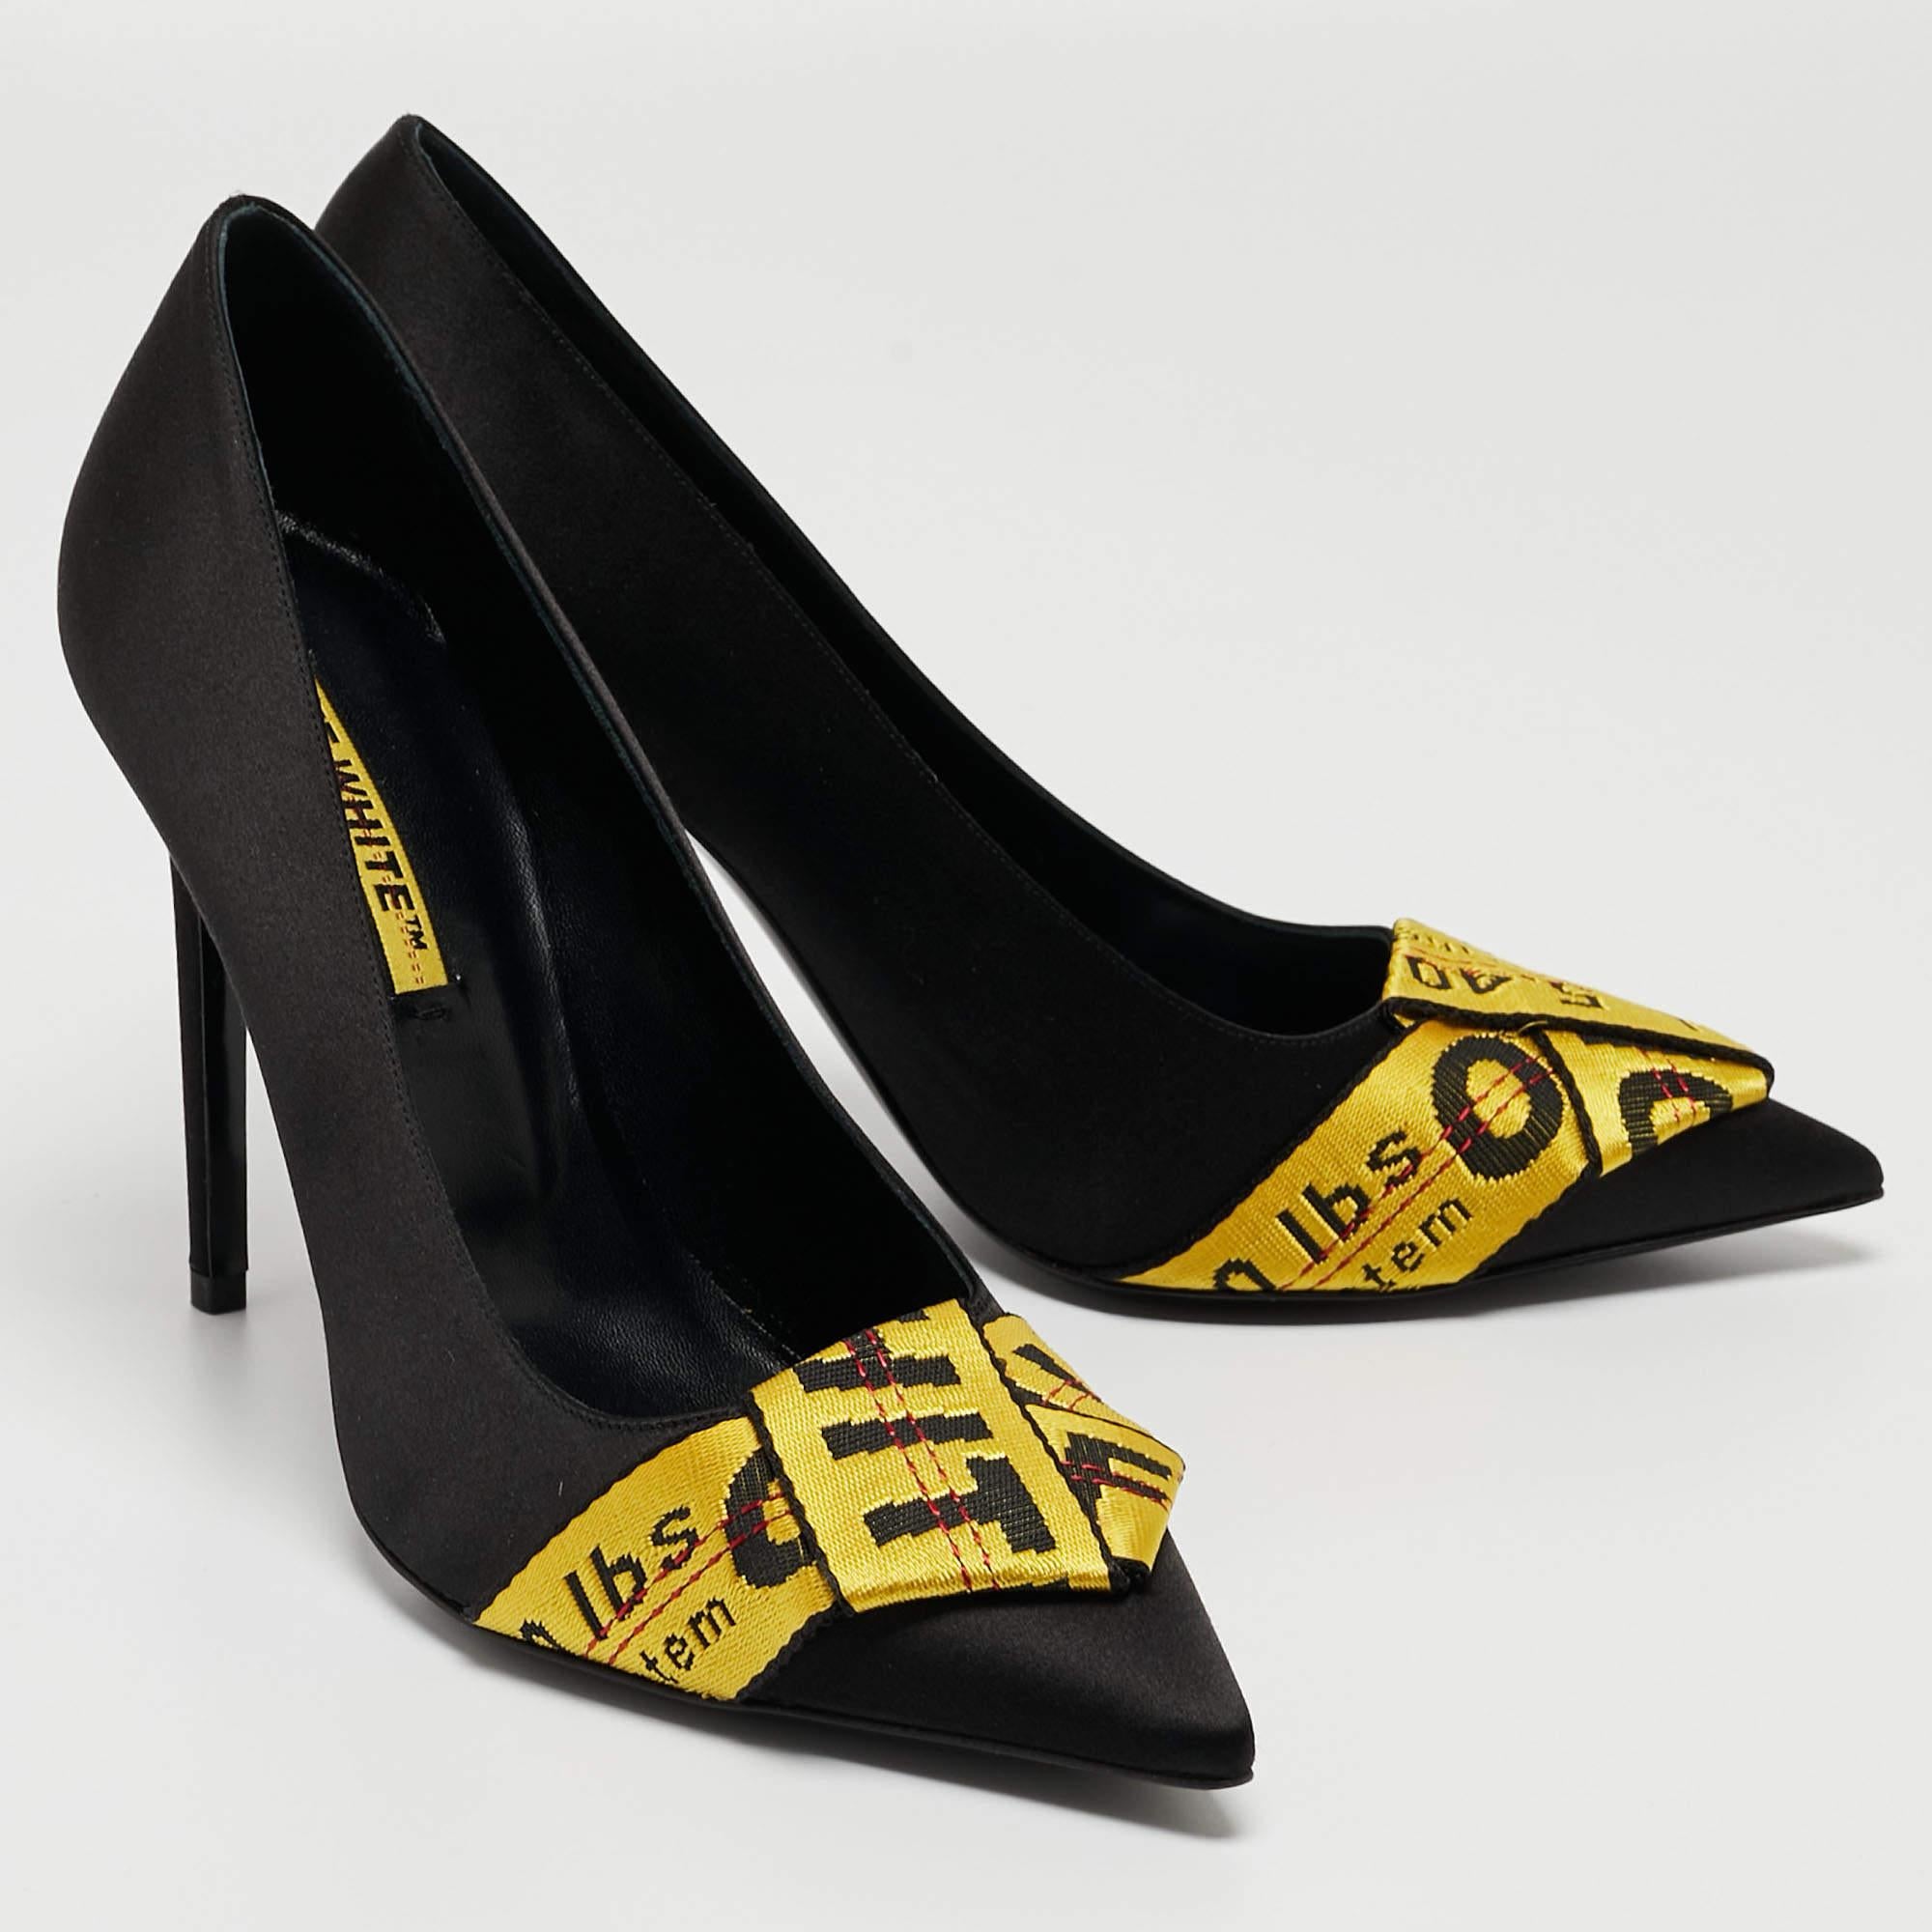 Off-White Black/Yellow Satin and Logo Canvas Commercial Bow Pumps Size 40 In New Condition For Sale In Dubai, Al Qouz 2